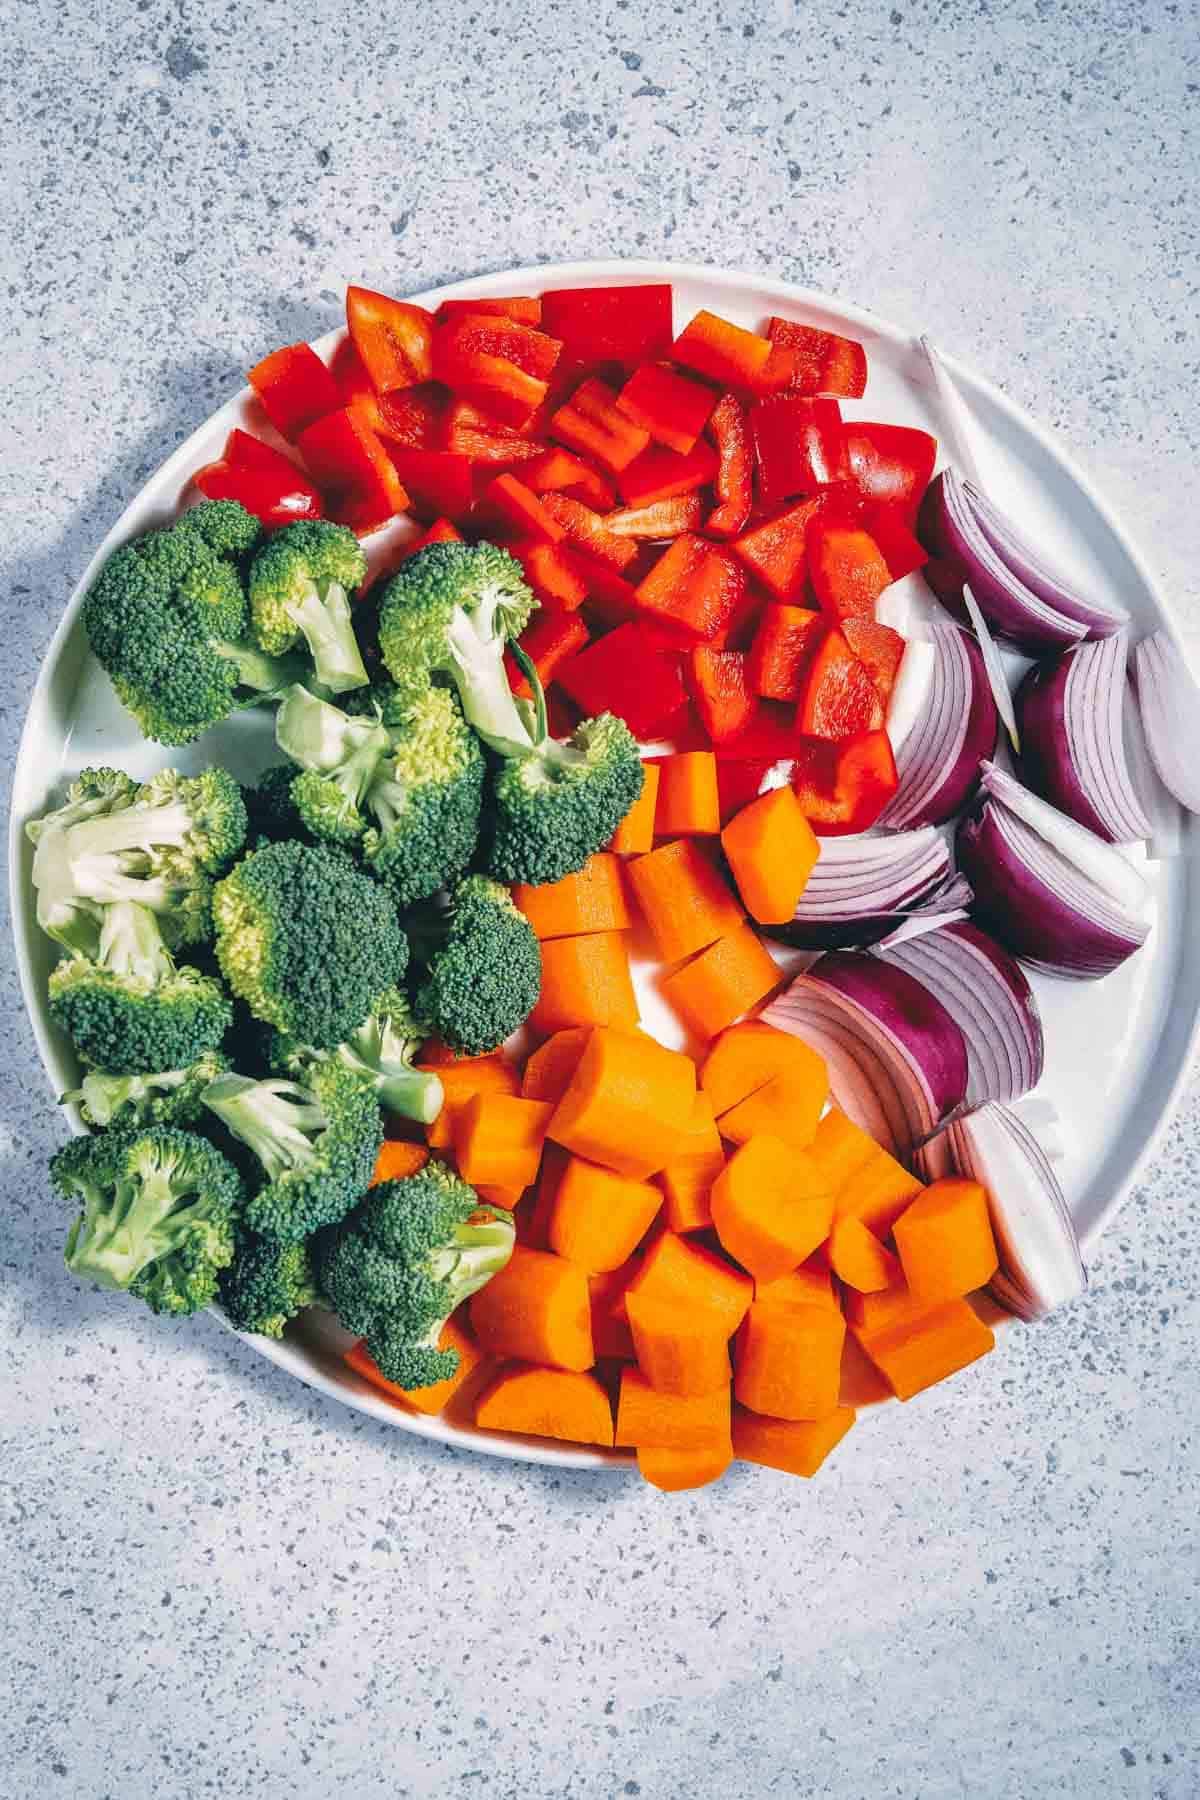 A plate of vegetables with broccoli, carrots and onions.